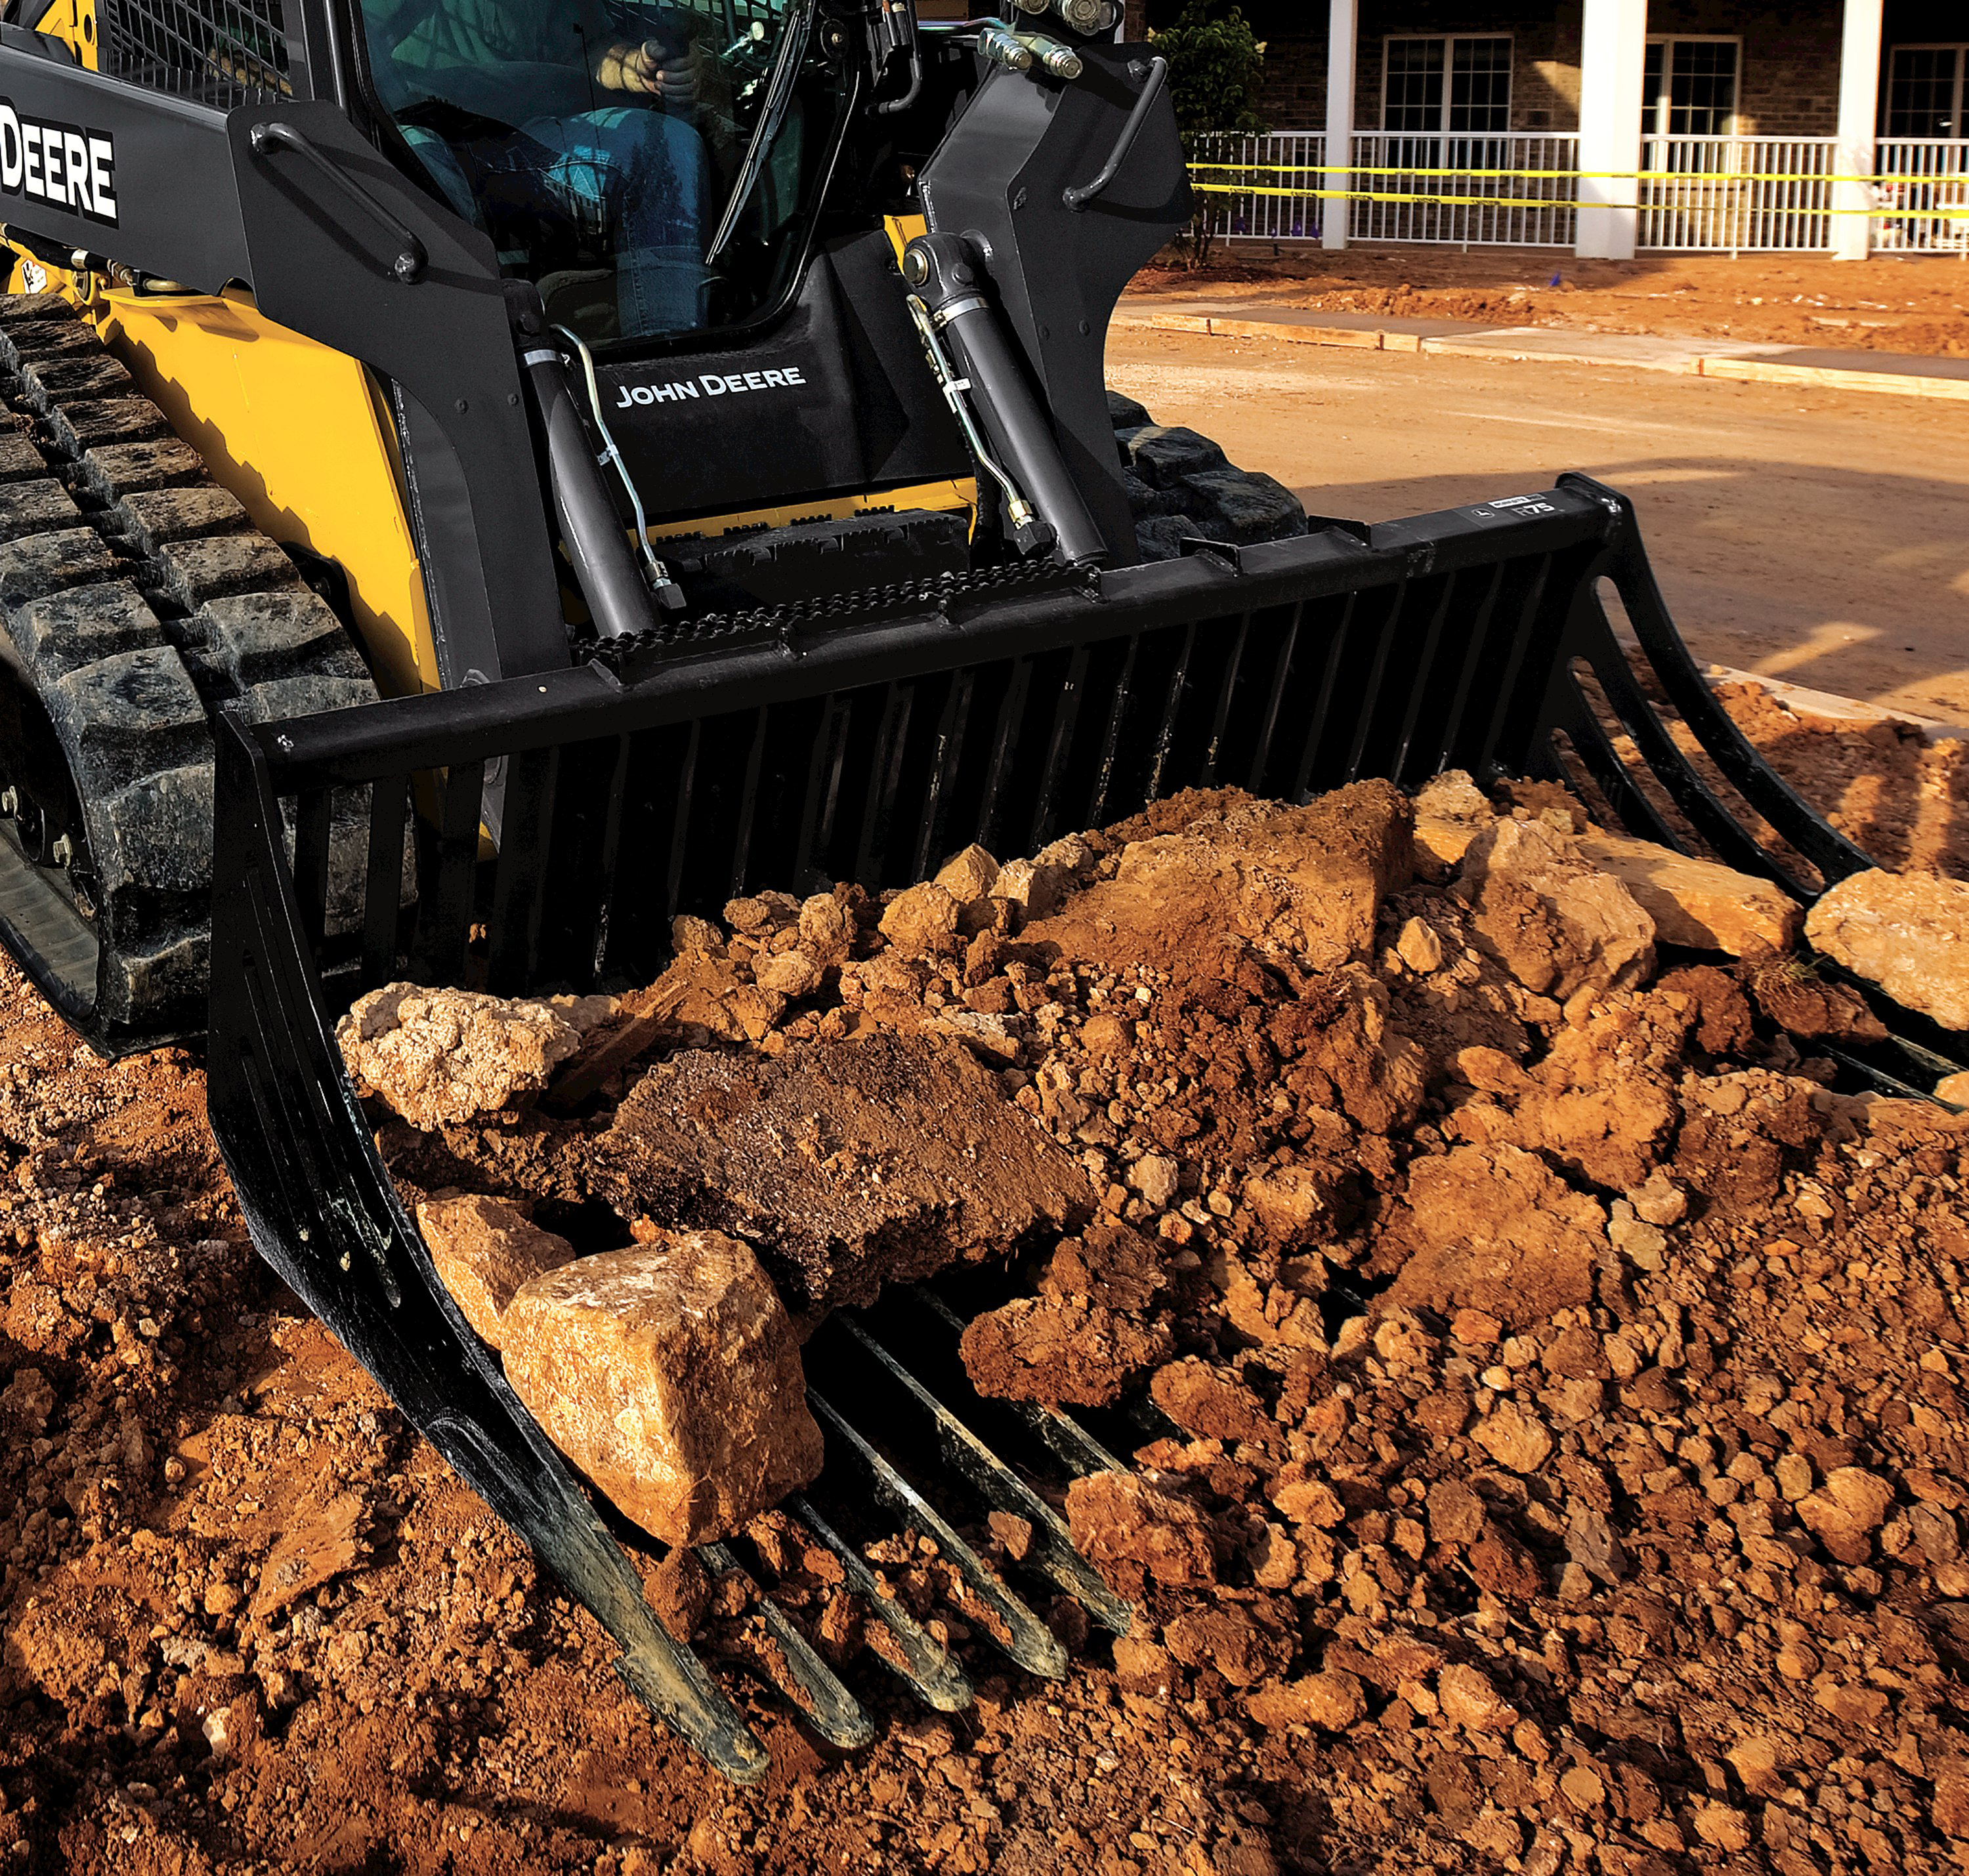 Worksite Pro Attachments from John Deere